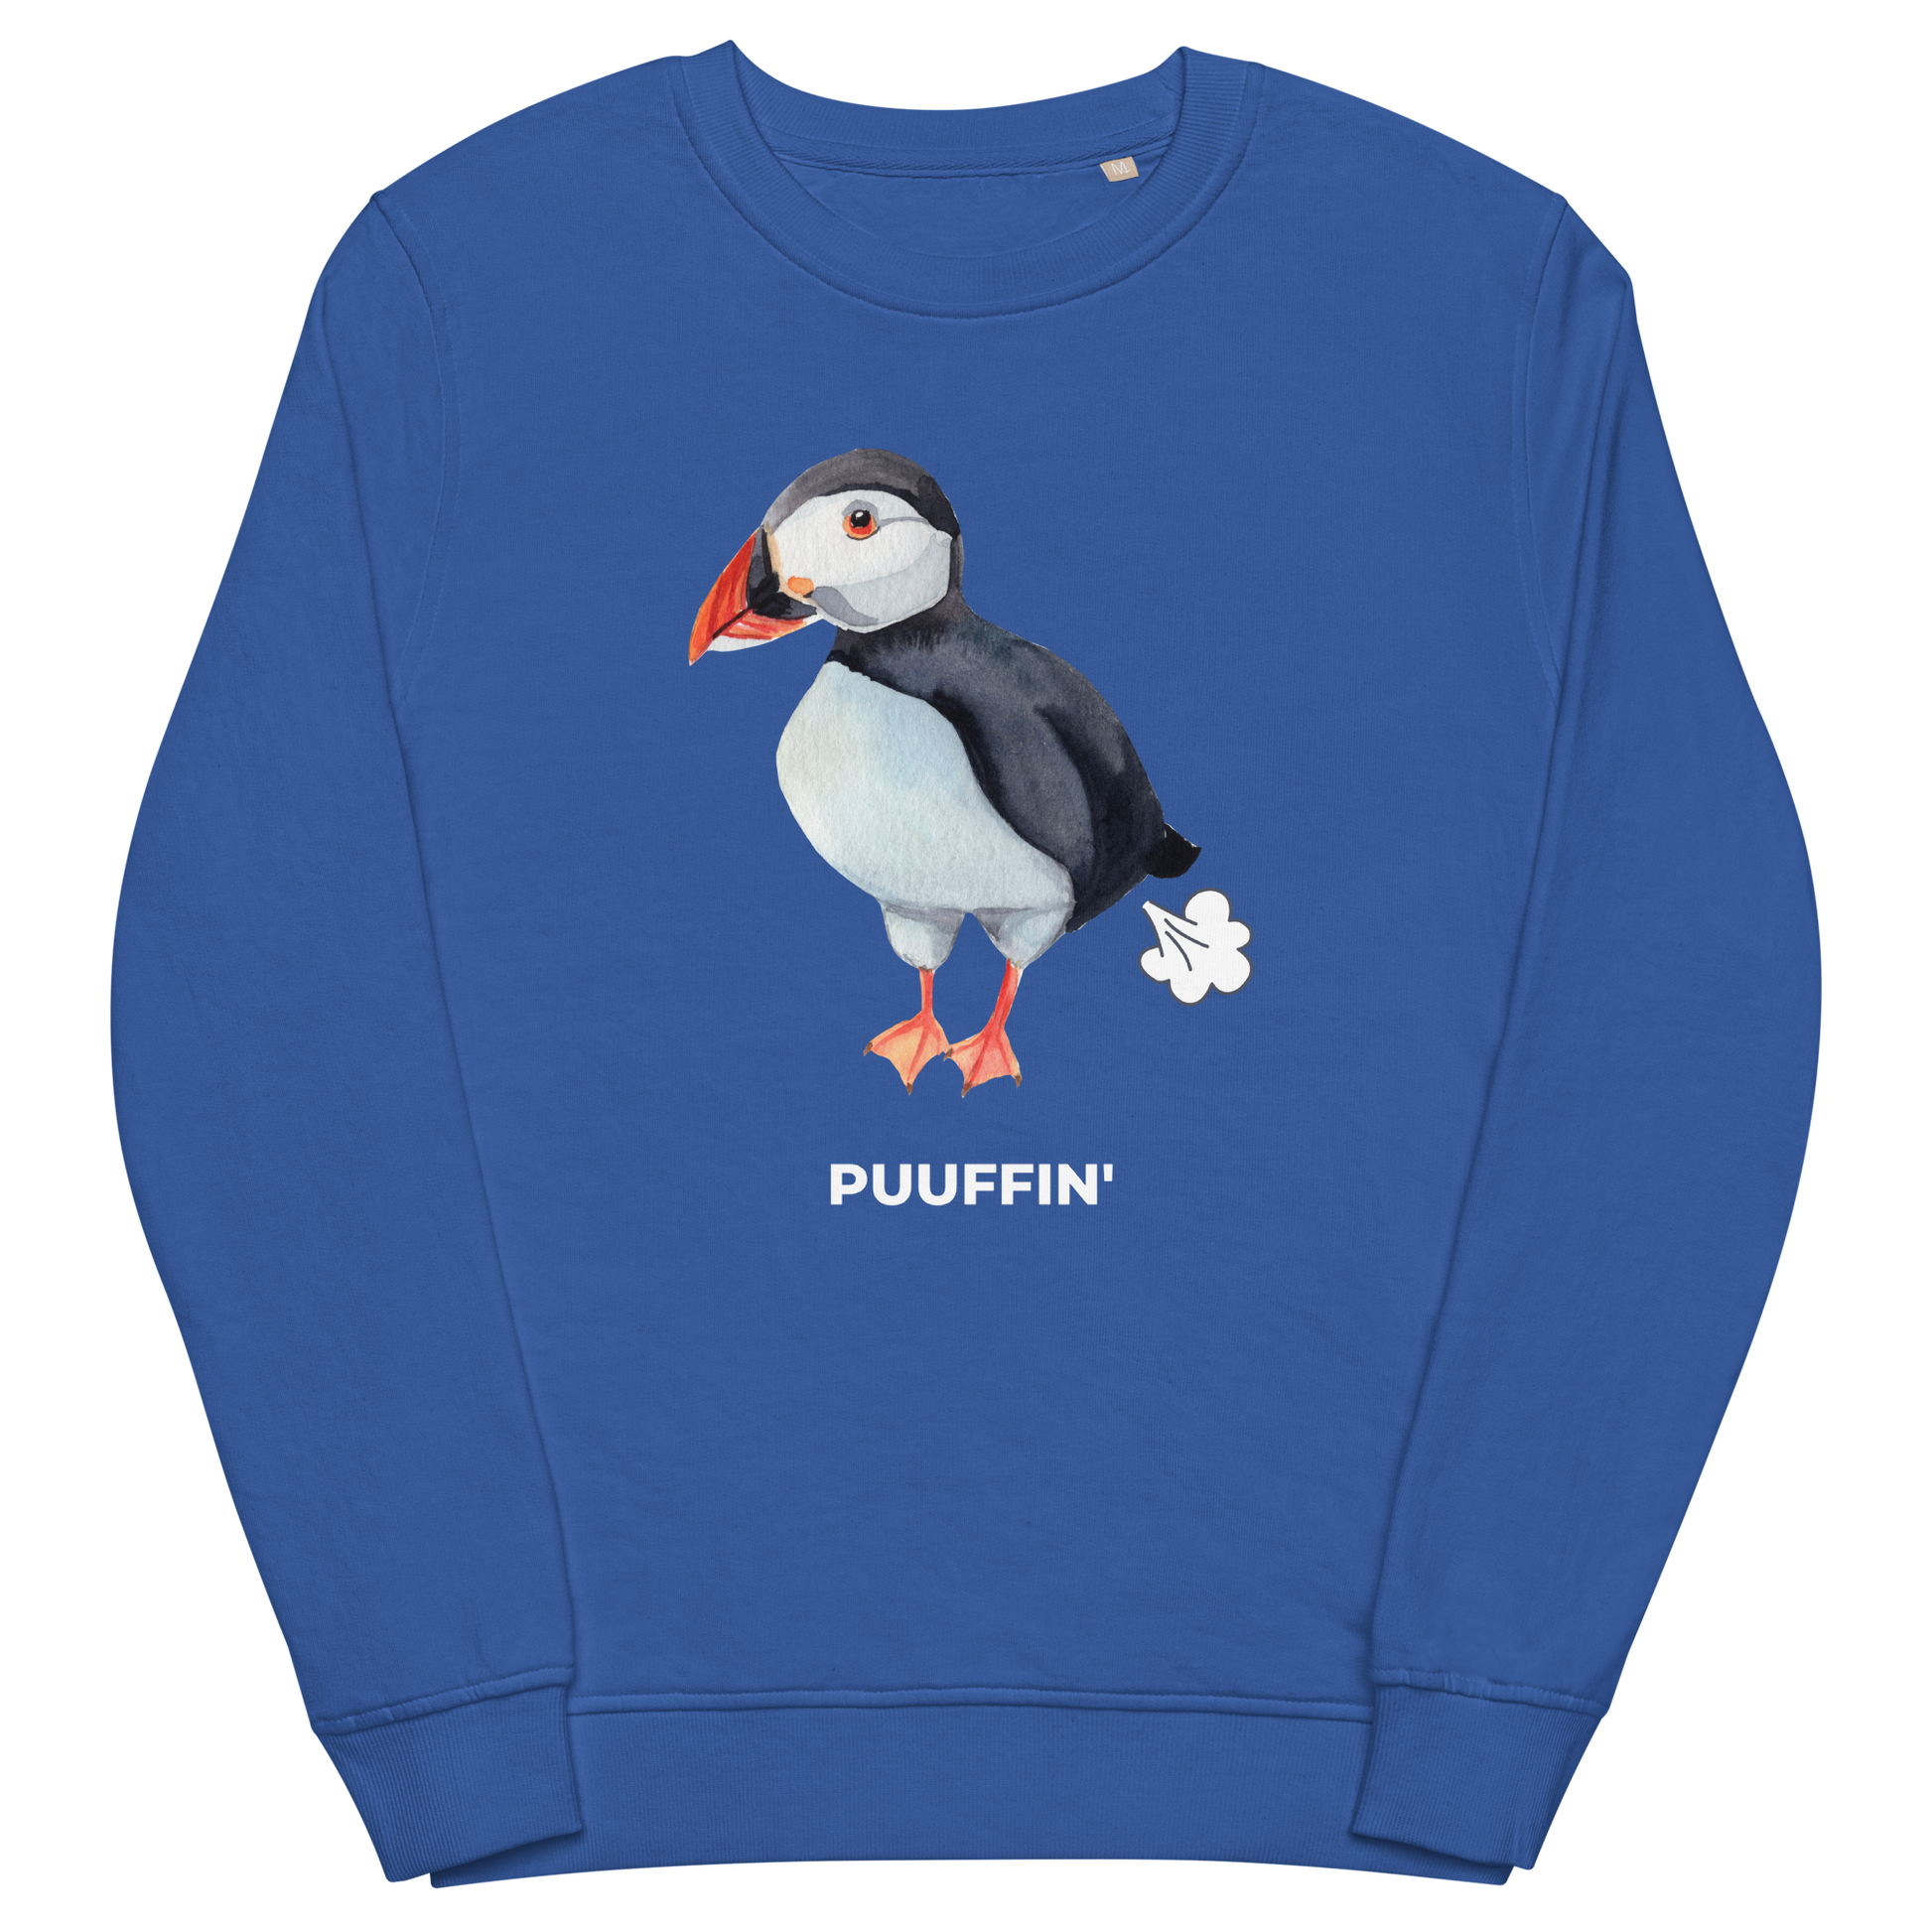 Royal Blue Organic Cotton Puffin Sweatshirt featuring a comic Puuffin' graphic on the chest - Funny Graphic Puffin Sweatshirts - Boozy Fox